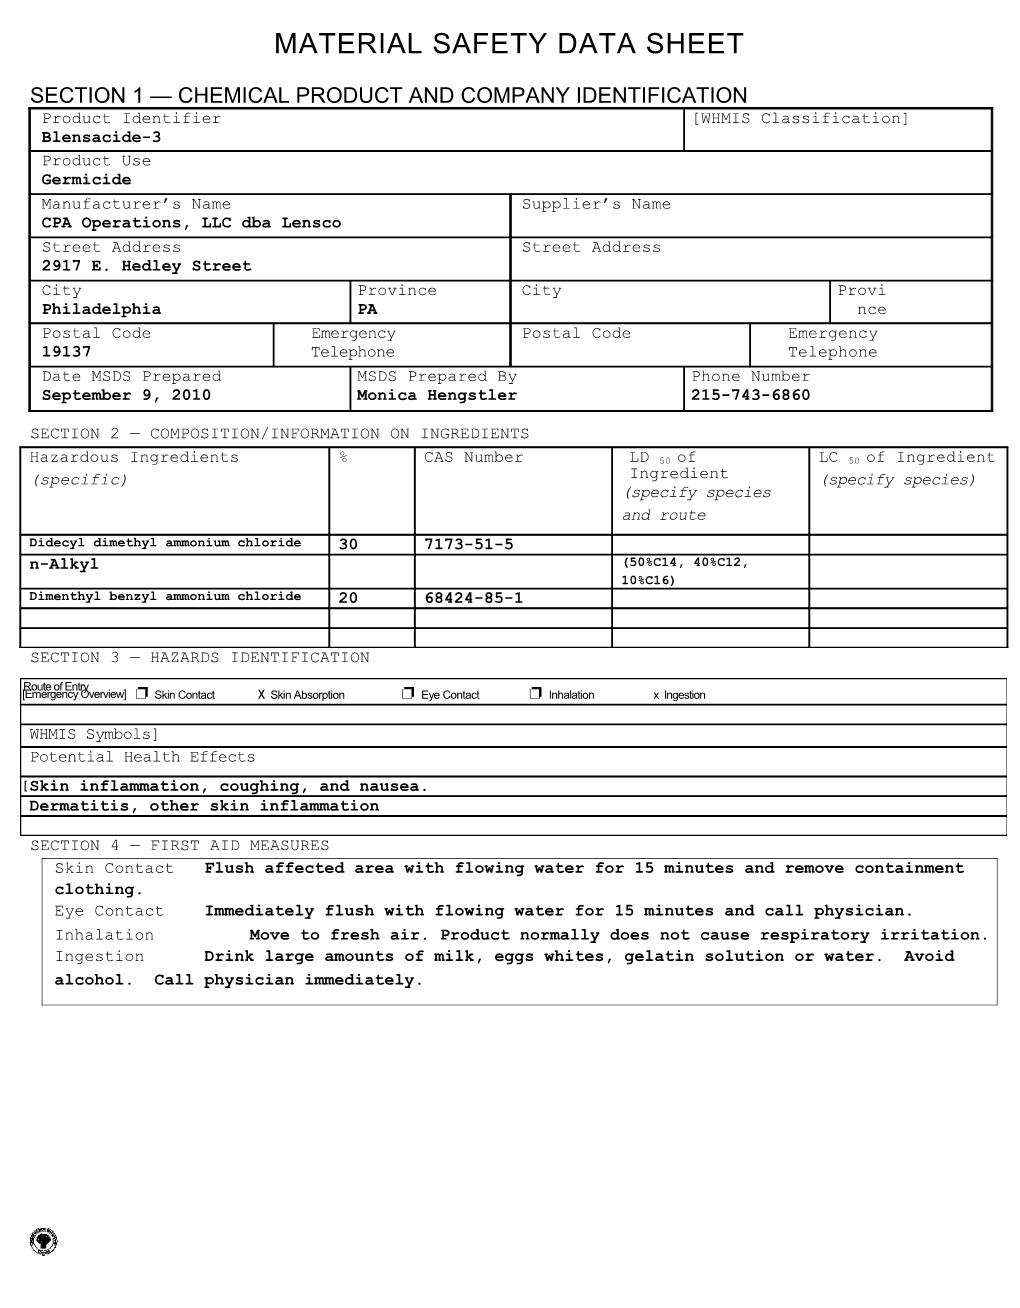 Material Safety Data Sheet s50